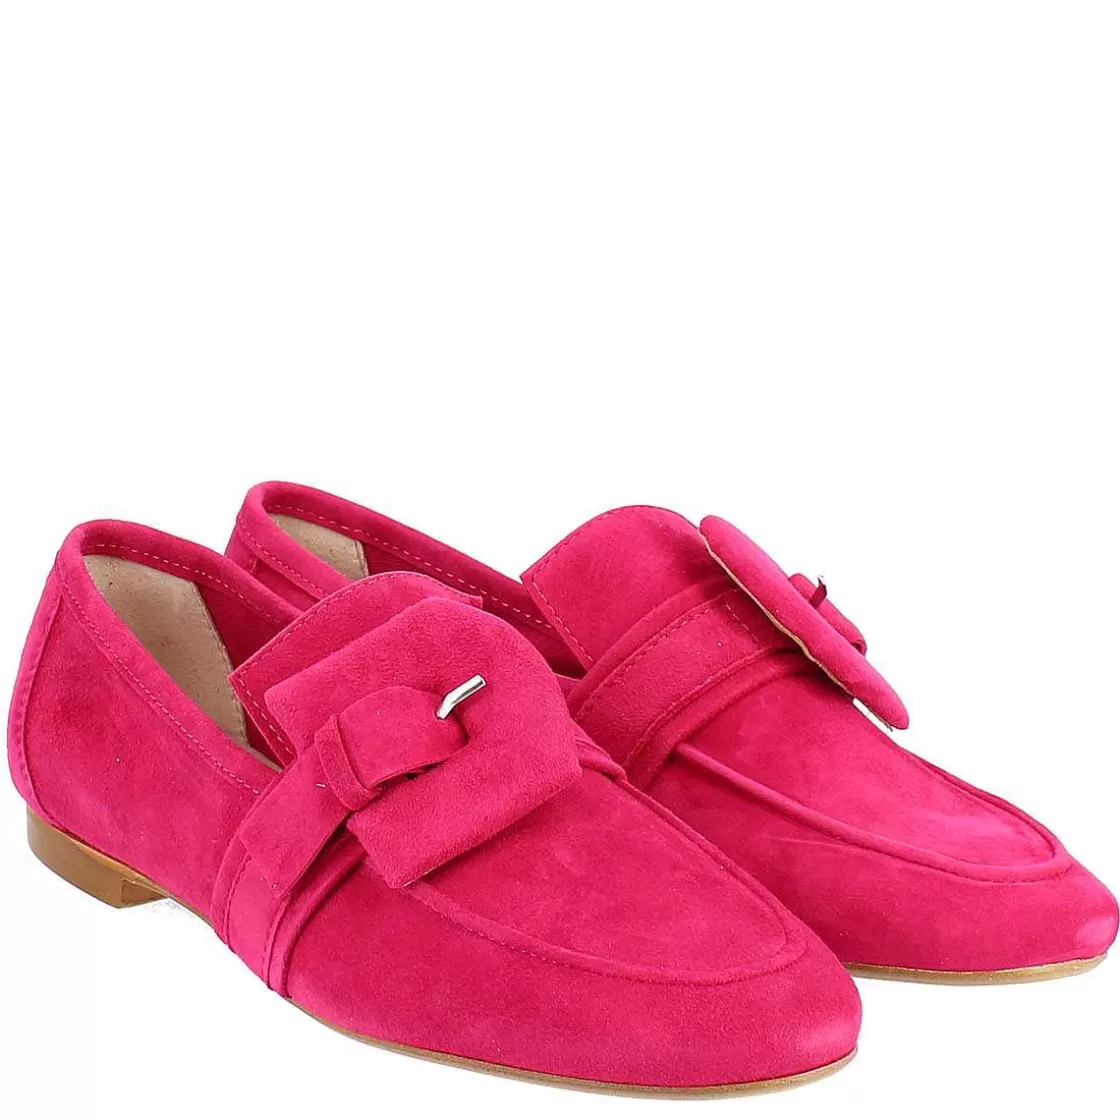 Leonardo Women'S Moccasin In Fuchsia Suede Handmade With Wrapped Buckle. Hot